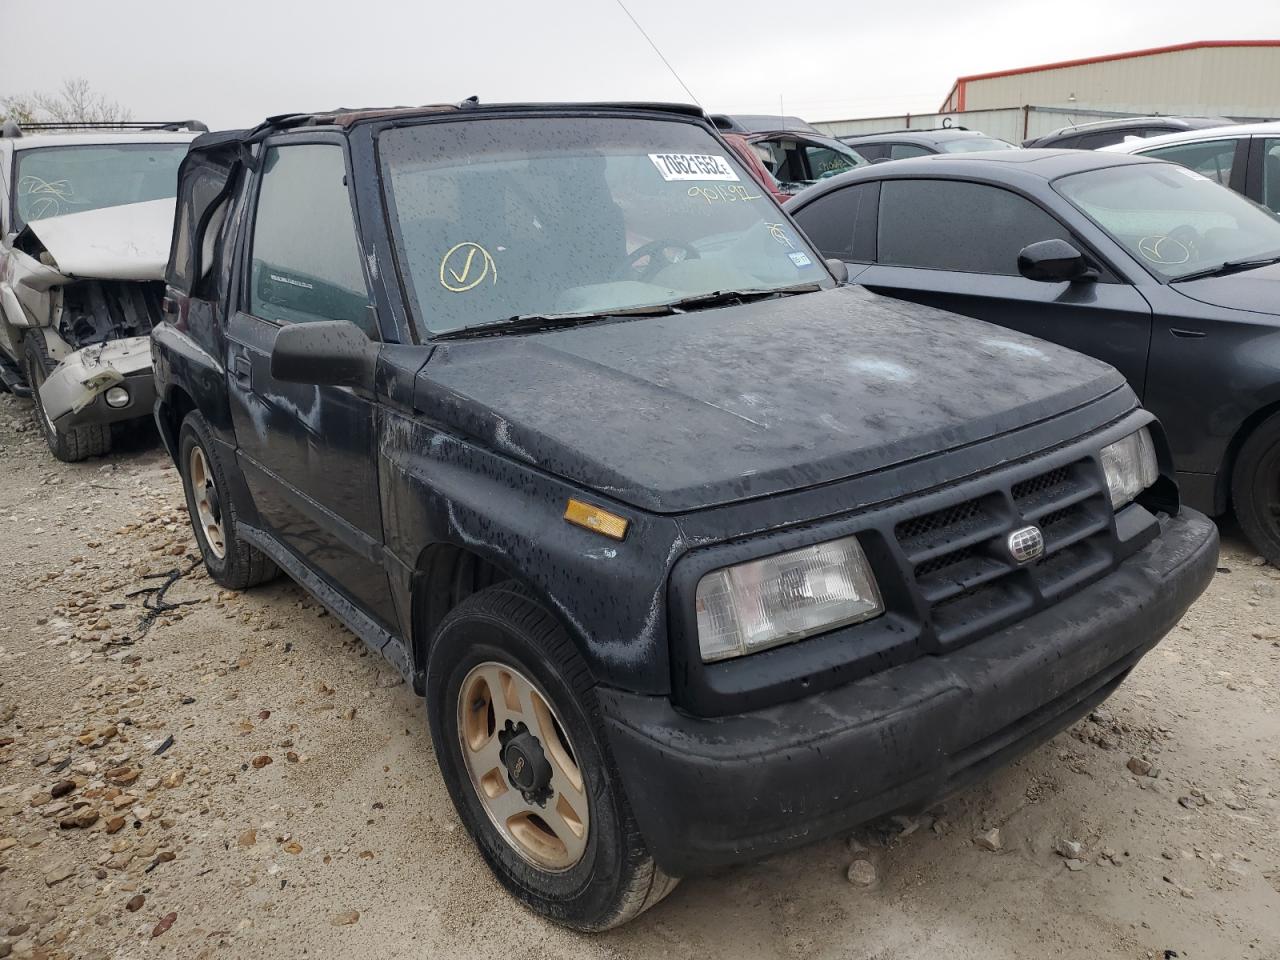 1997 GEO Tracker for sale at Copart Haslet, TX Lot #70621*** |  SalvageReseller.com